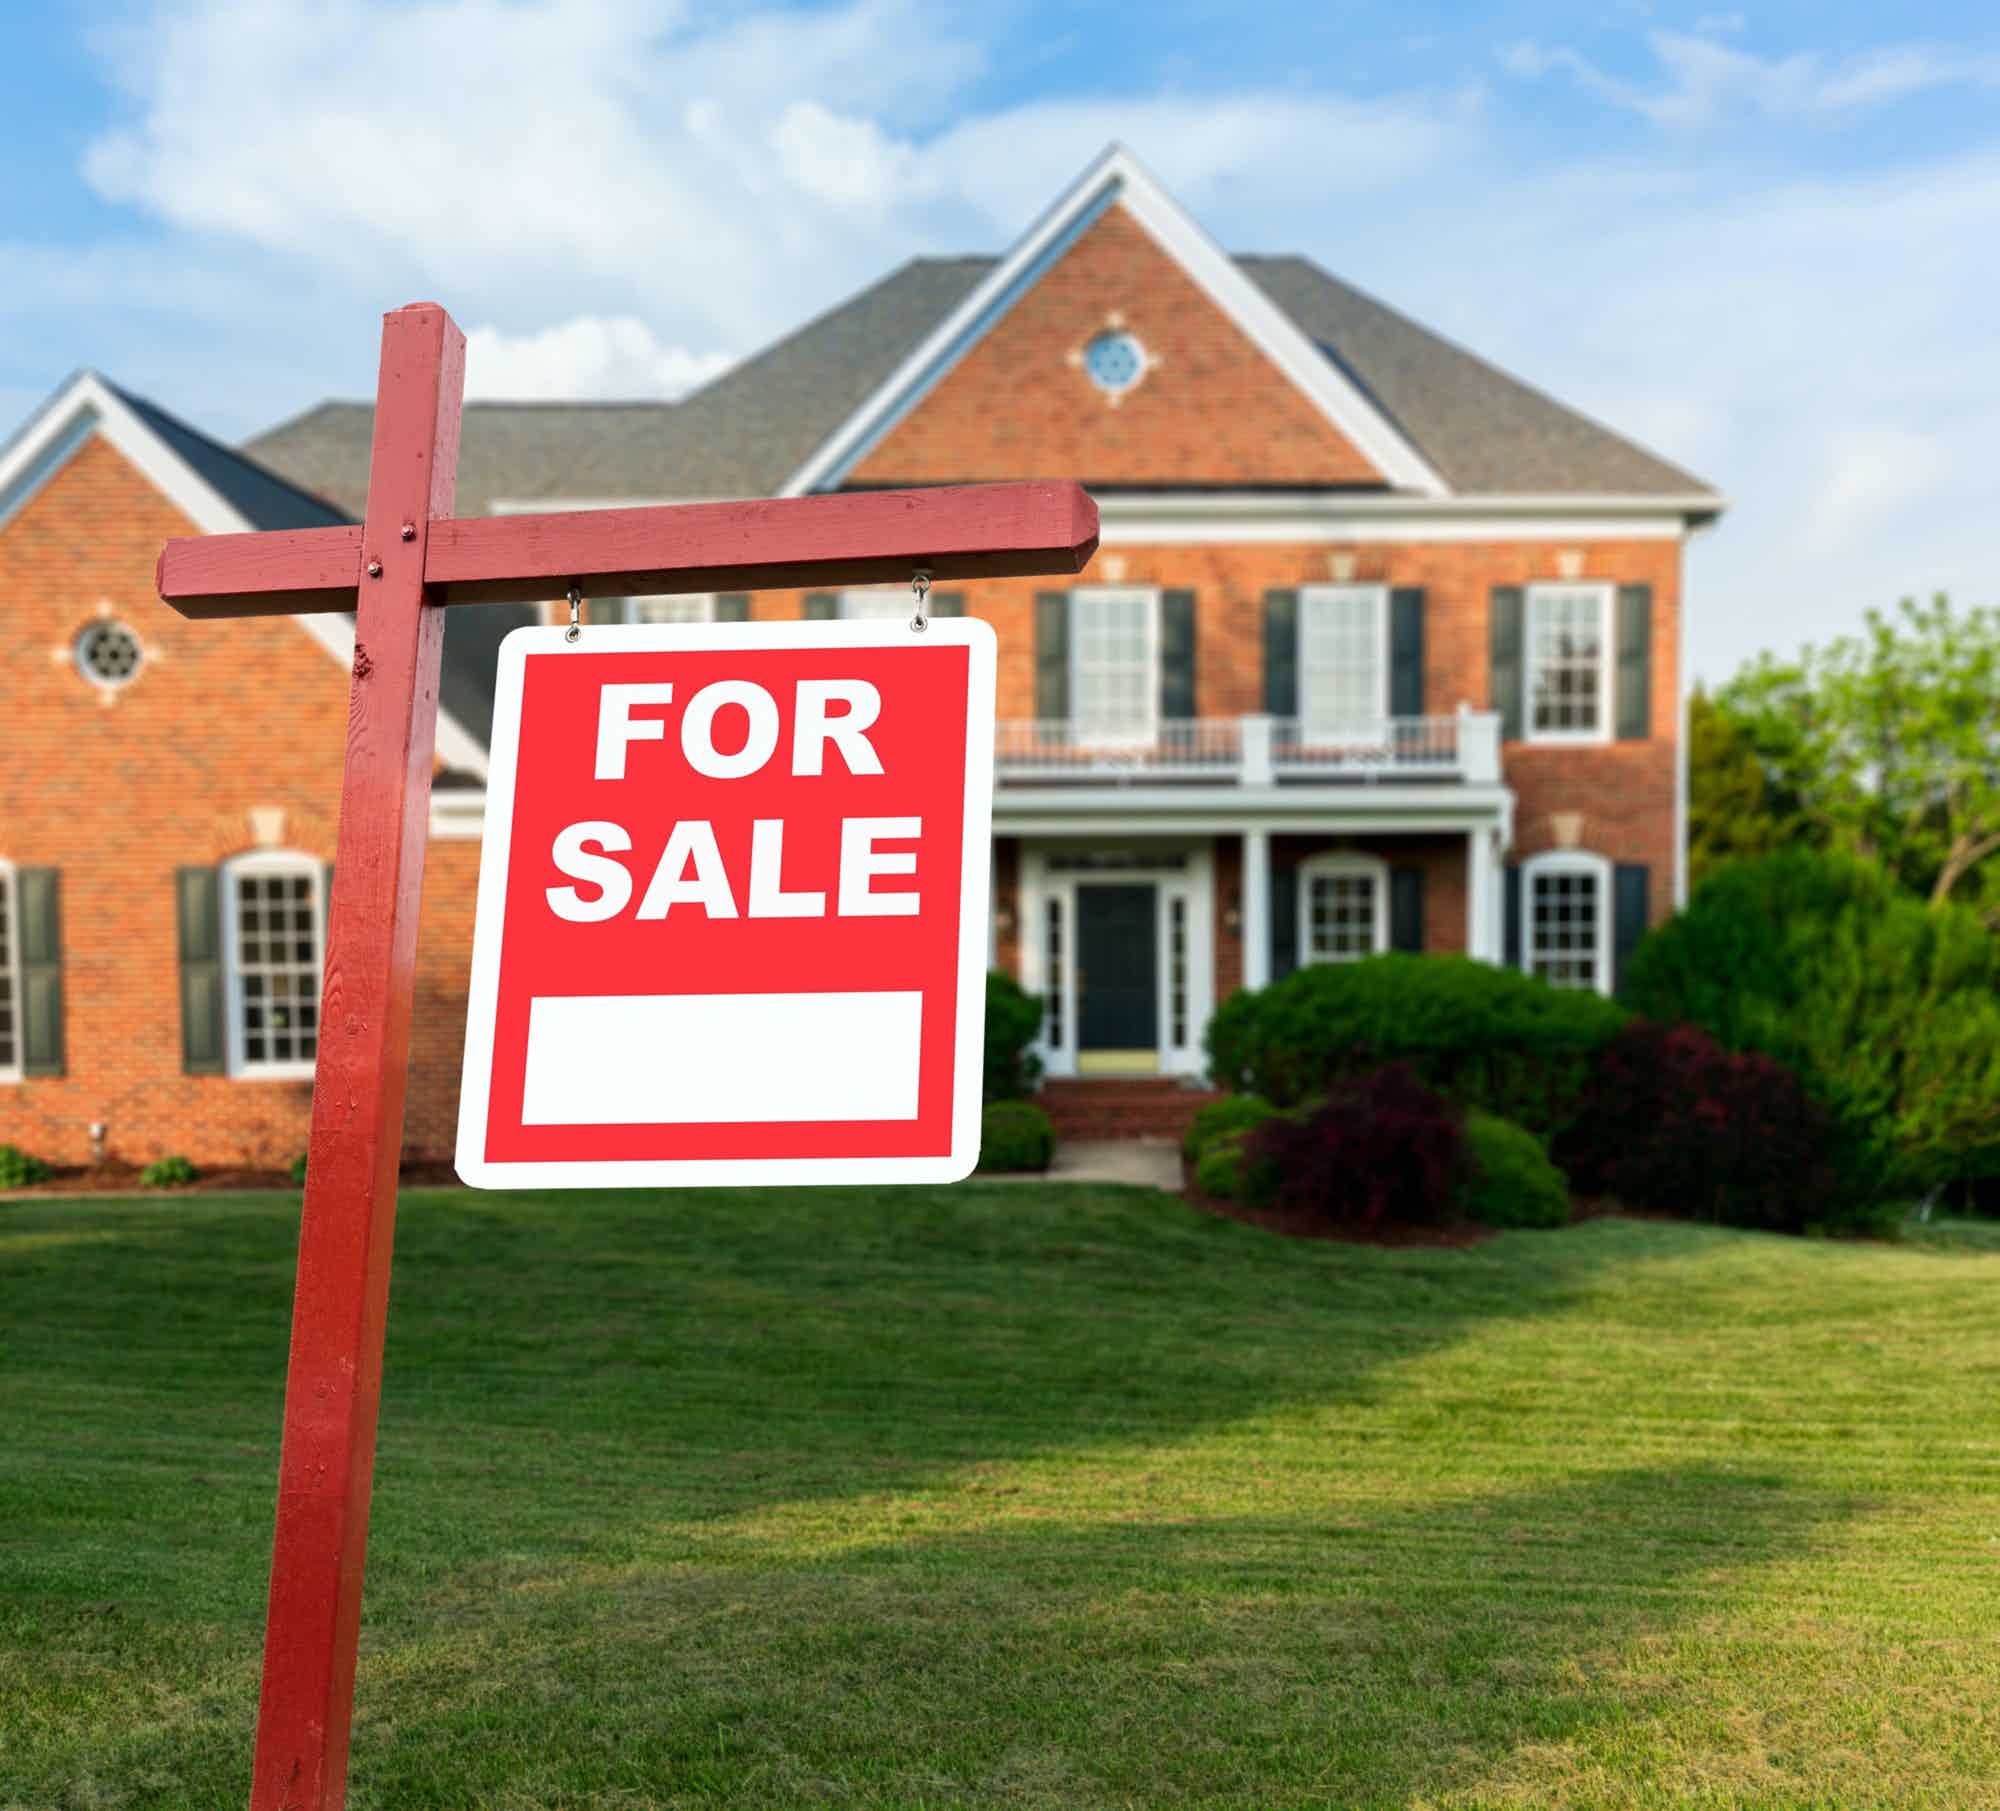 How Can I Sell My House Fast? 5 Real Estate Secrets